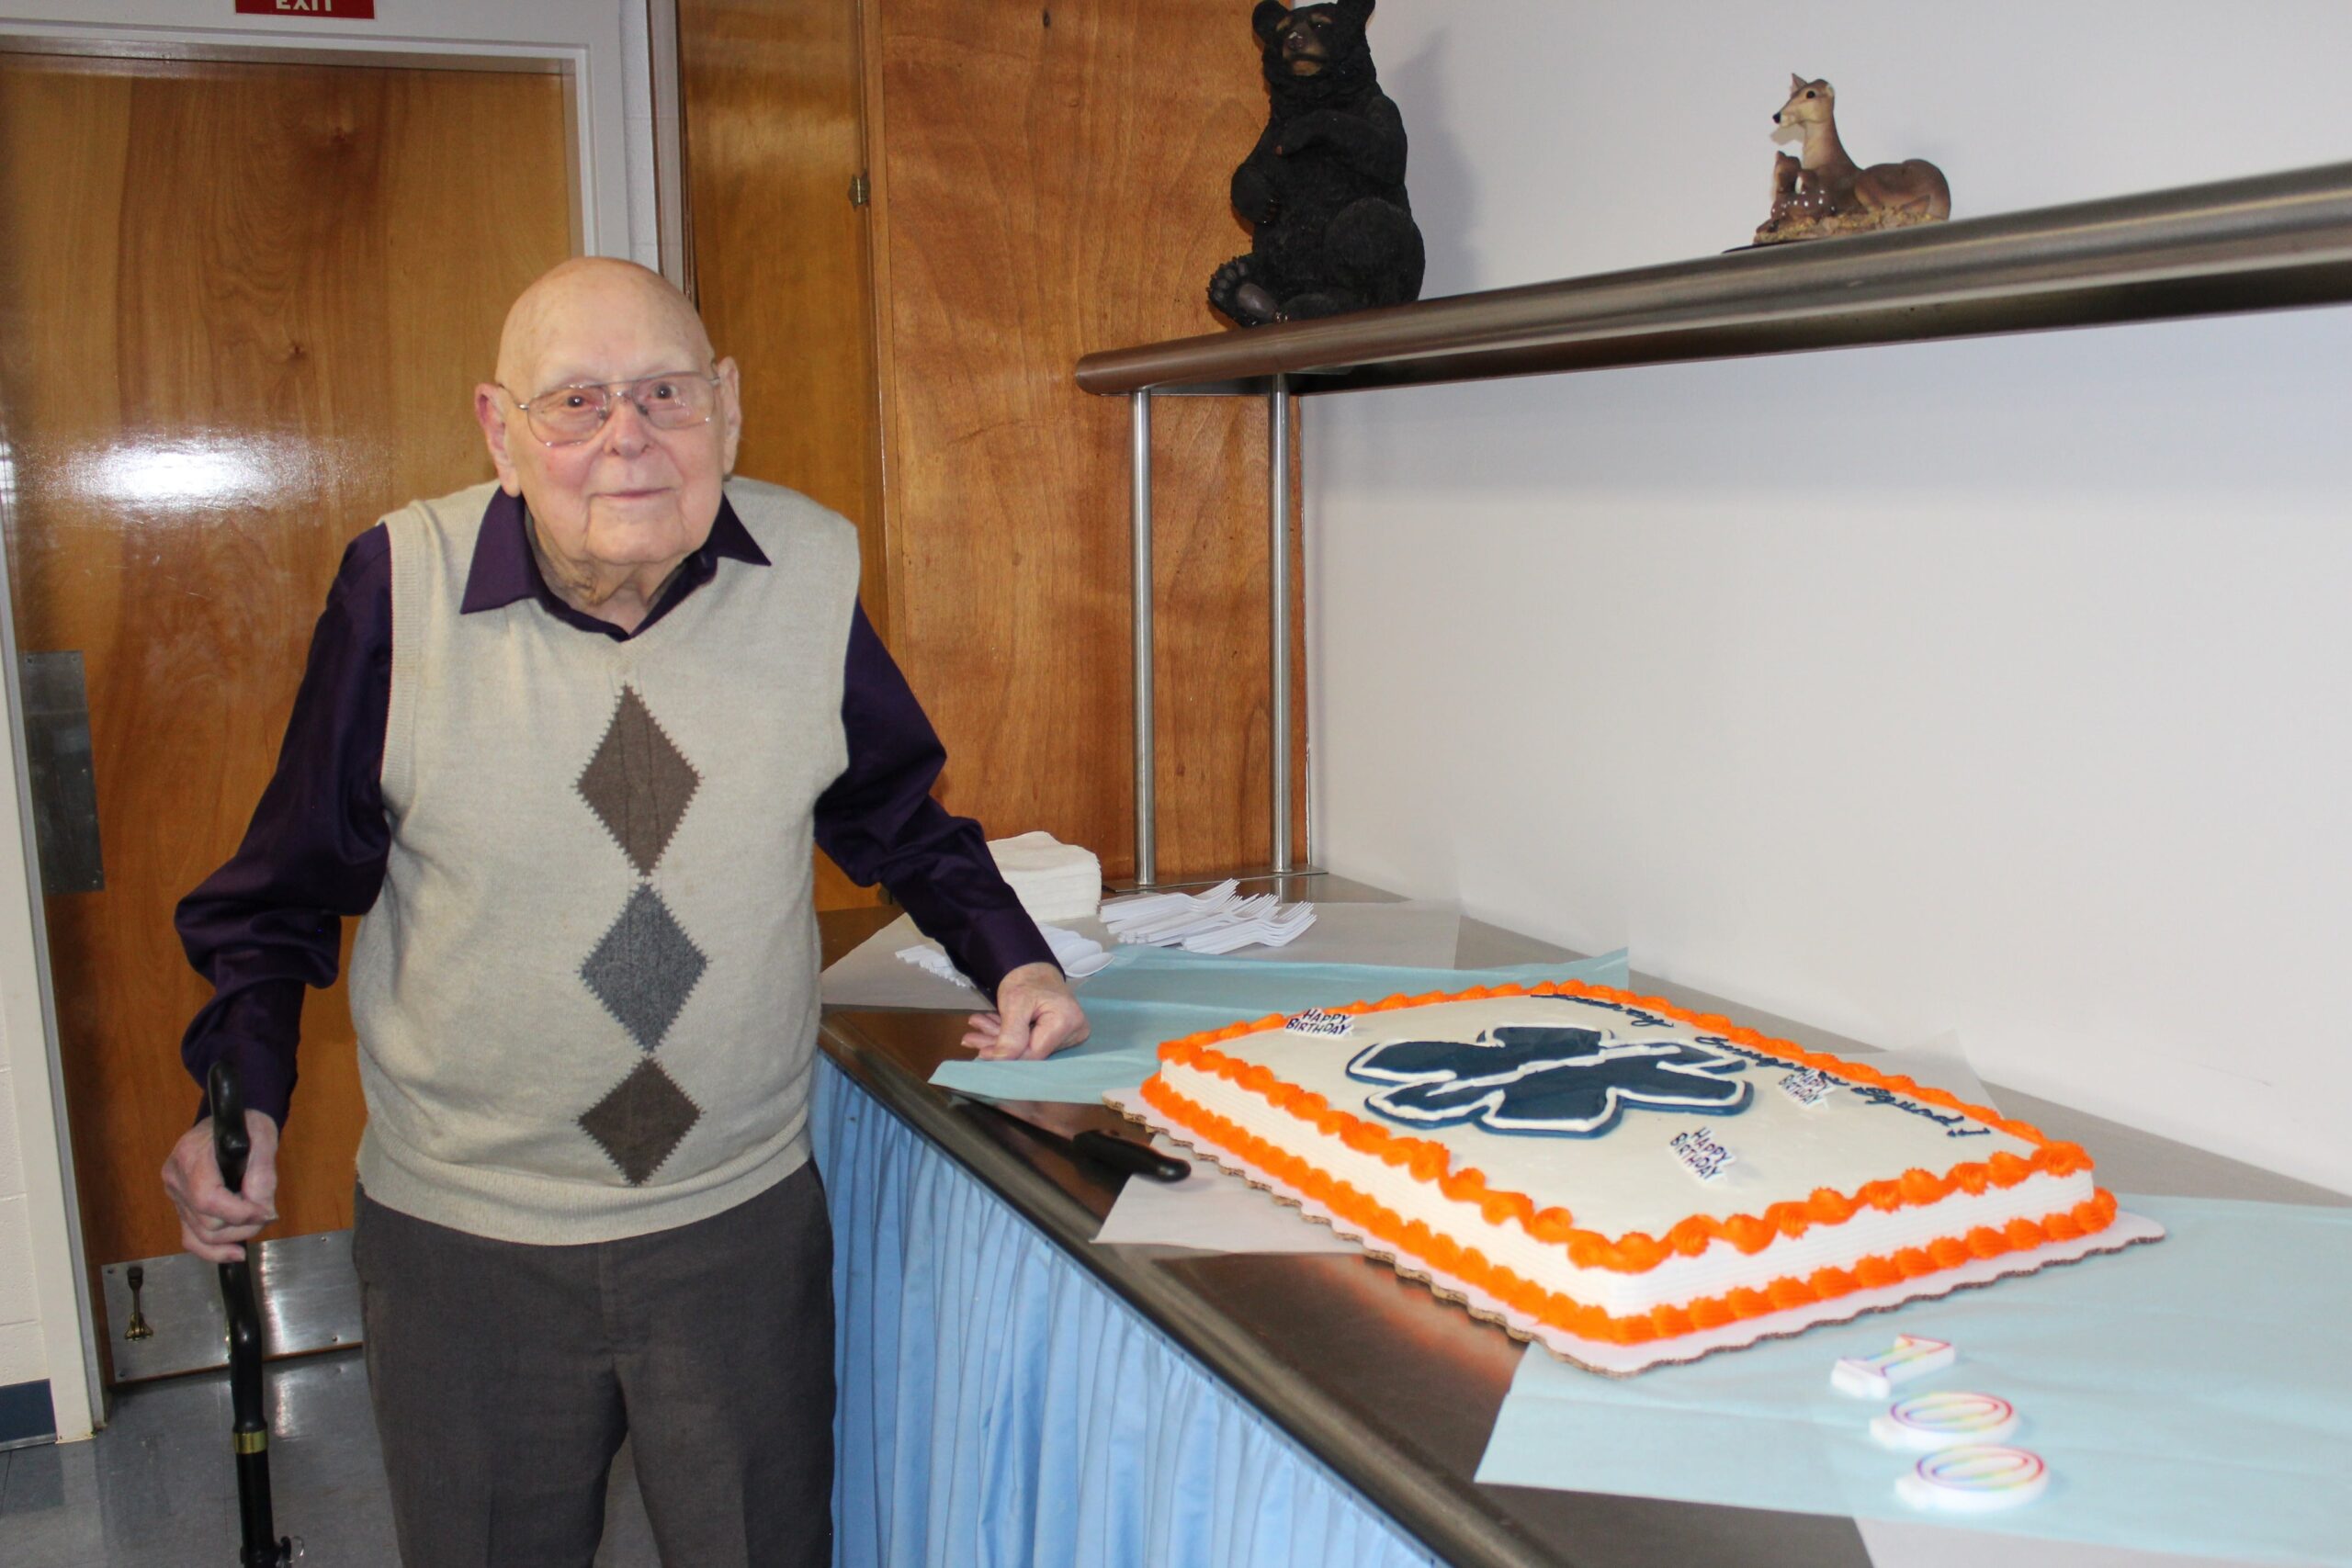 Bill and his cake at the Broadway Emergency Squad